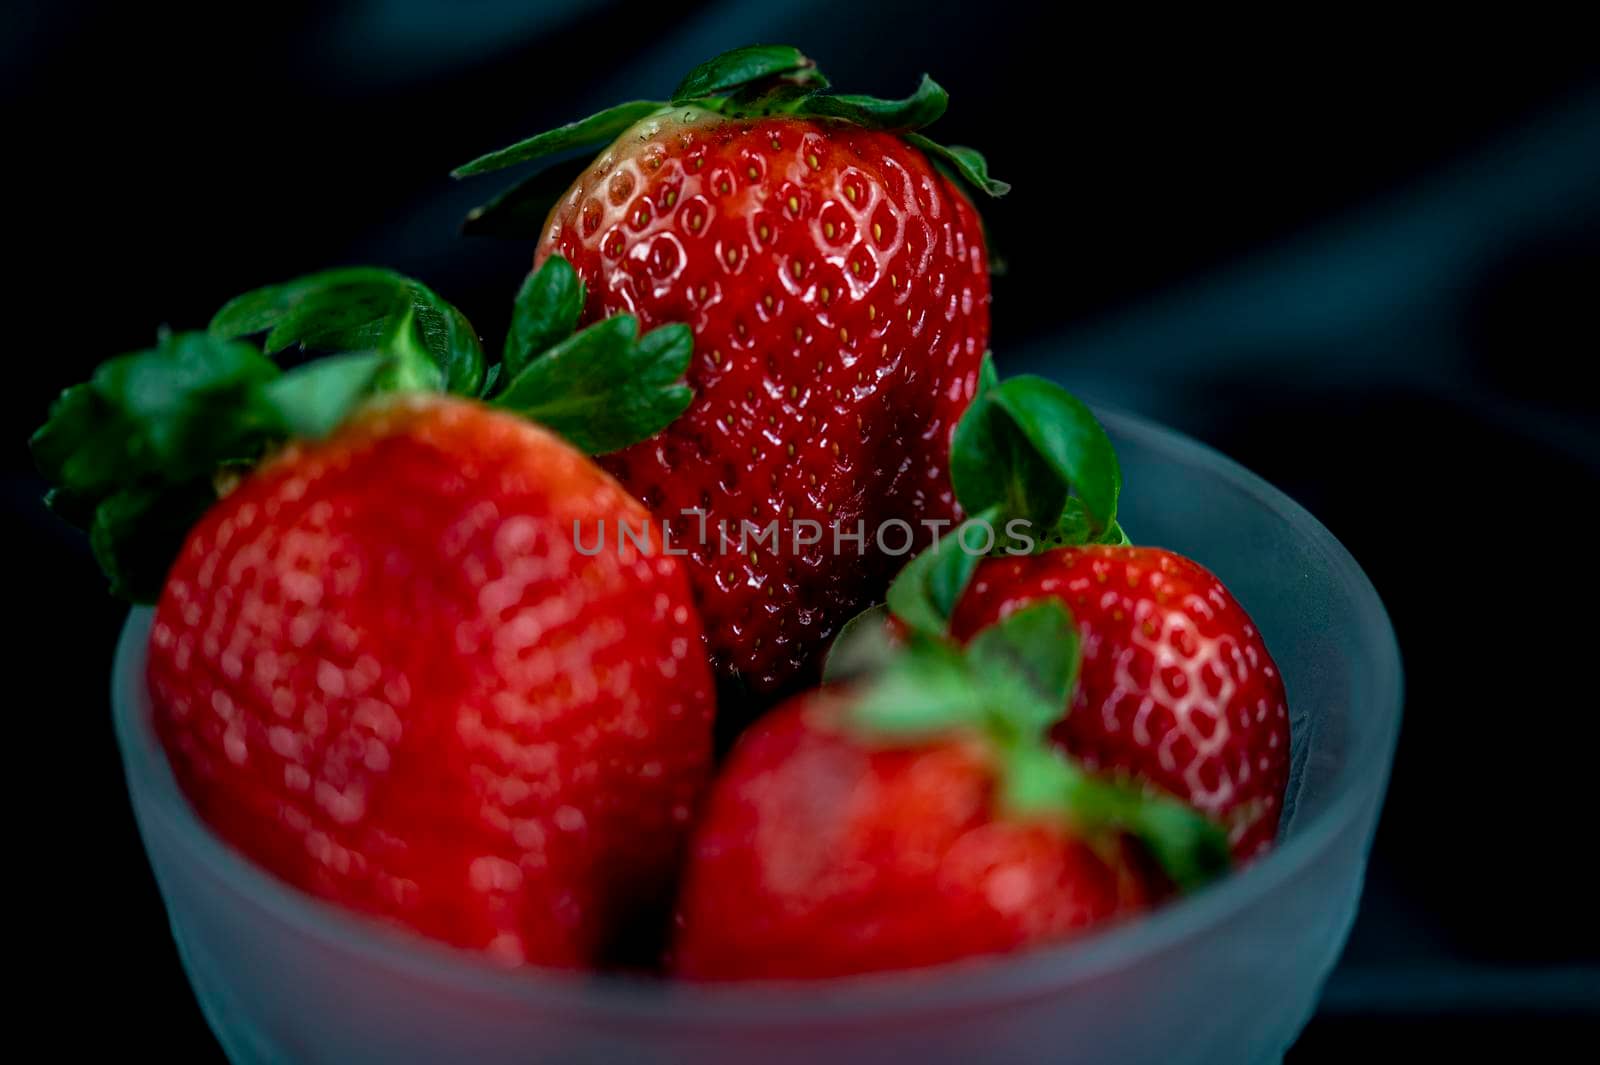 cup of ripe strawberries on black background by carfedeph